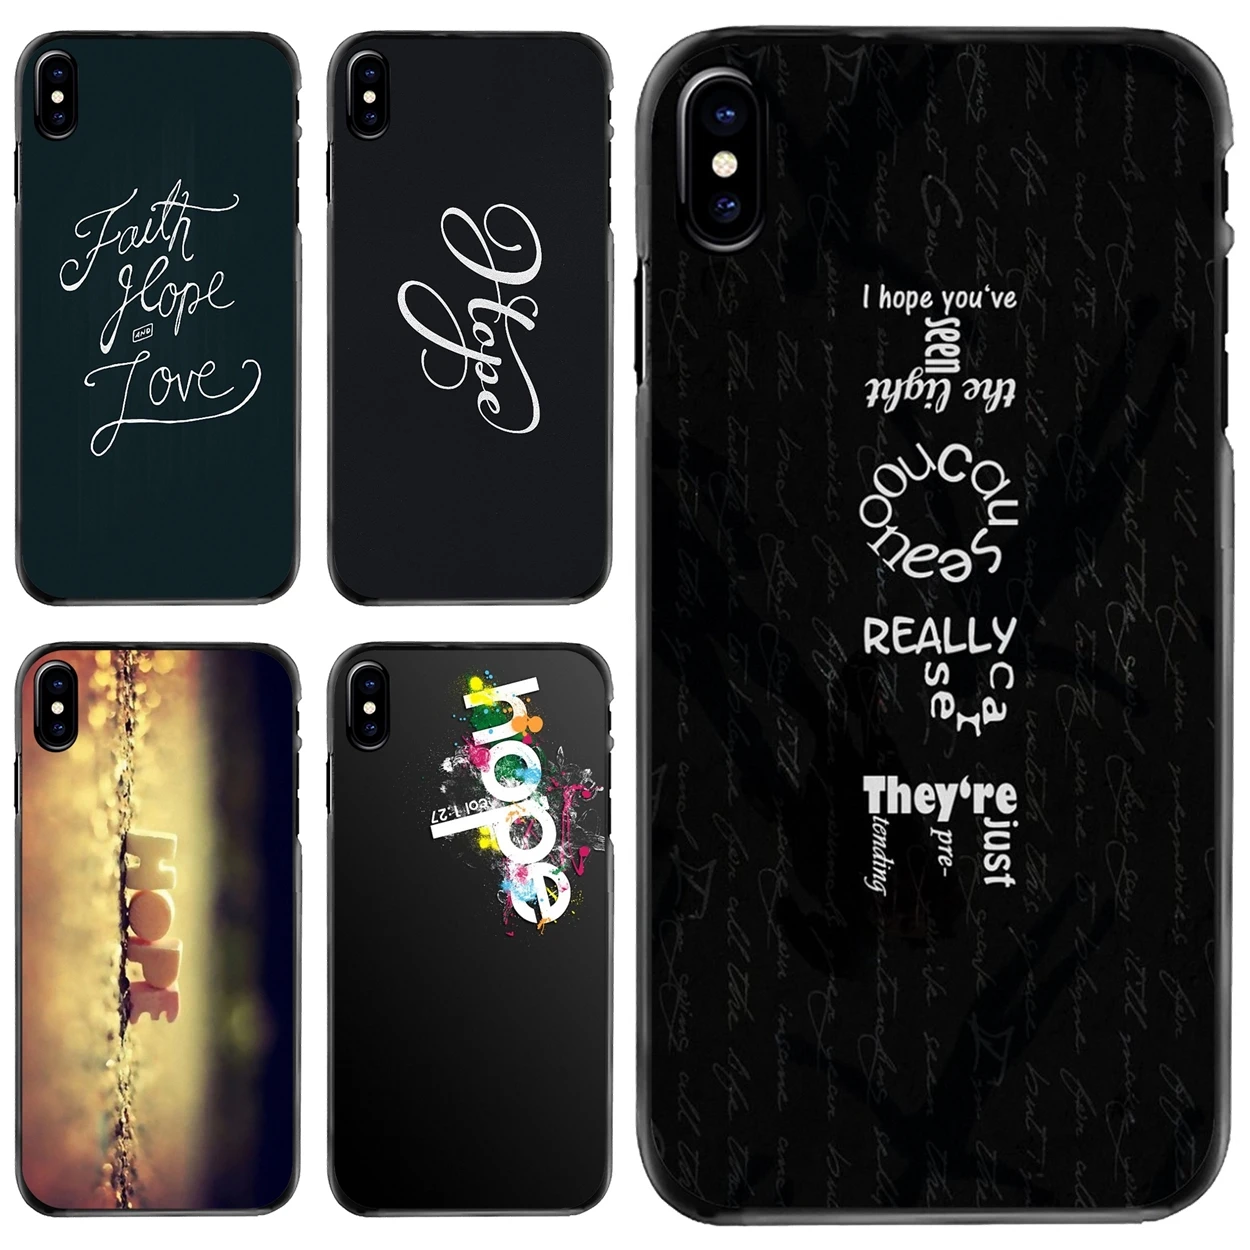 

Faith Hope Love Life Quotes For Apple iPhone 11 12 13 14 Pro MAX Mini 5 5S SE 6 6S 7 8 Plus 10 X XR XS Hard Phone Cover Case